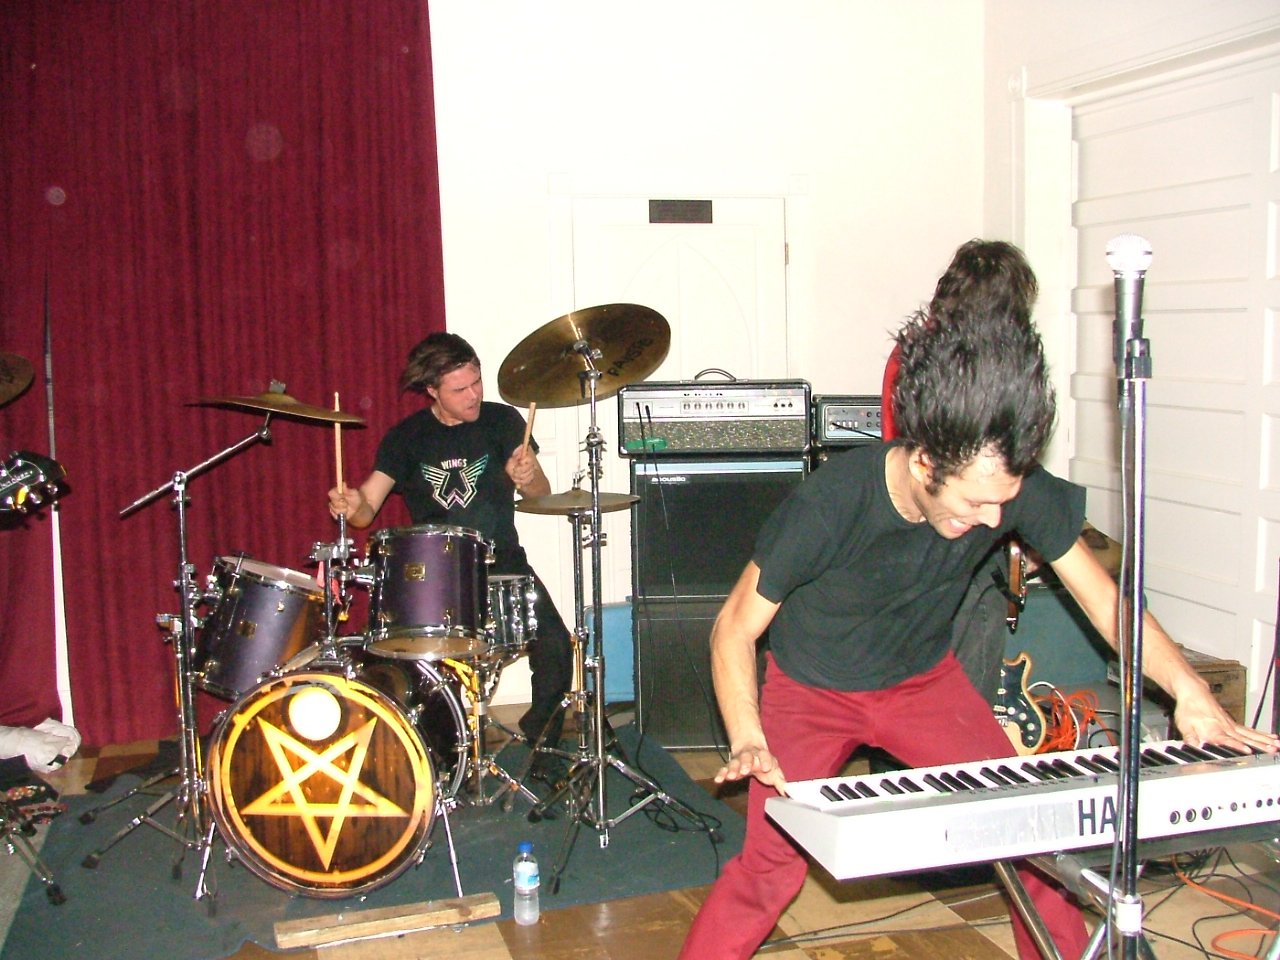 band playing instruments in an empty room with red curtains